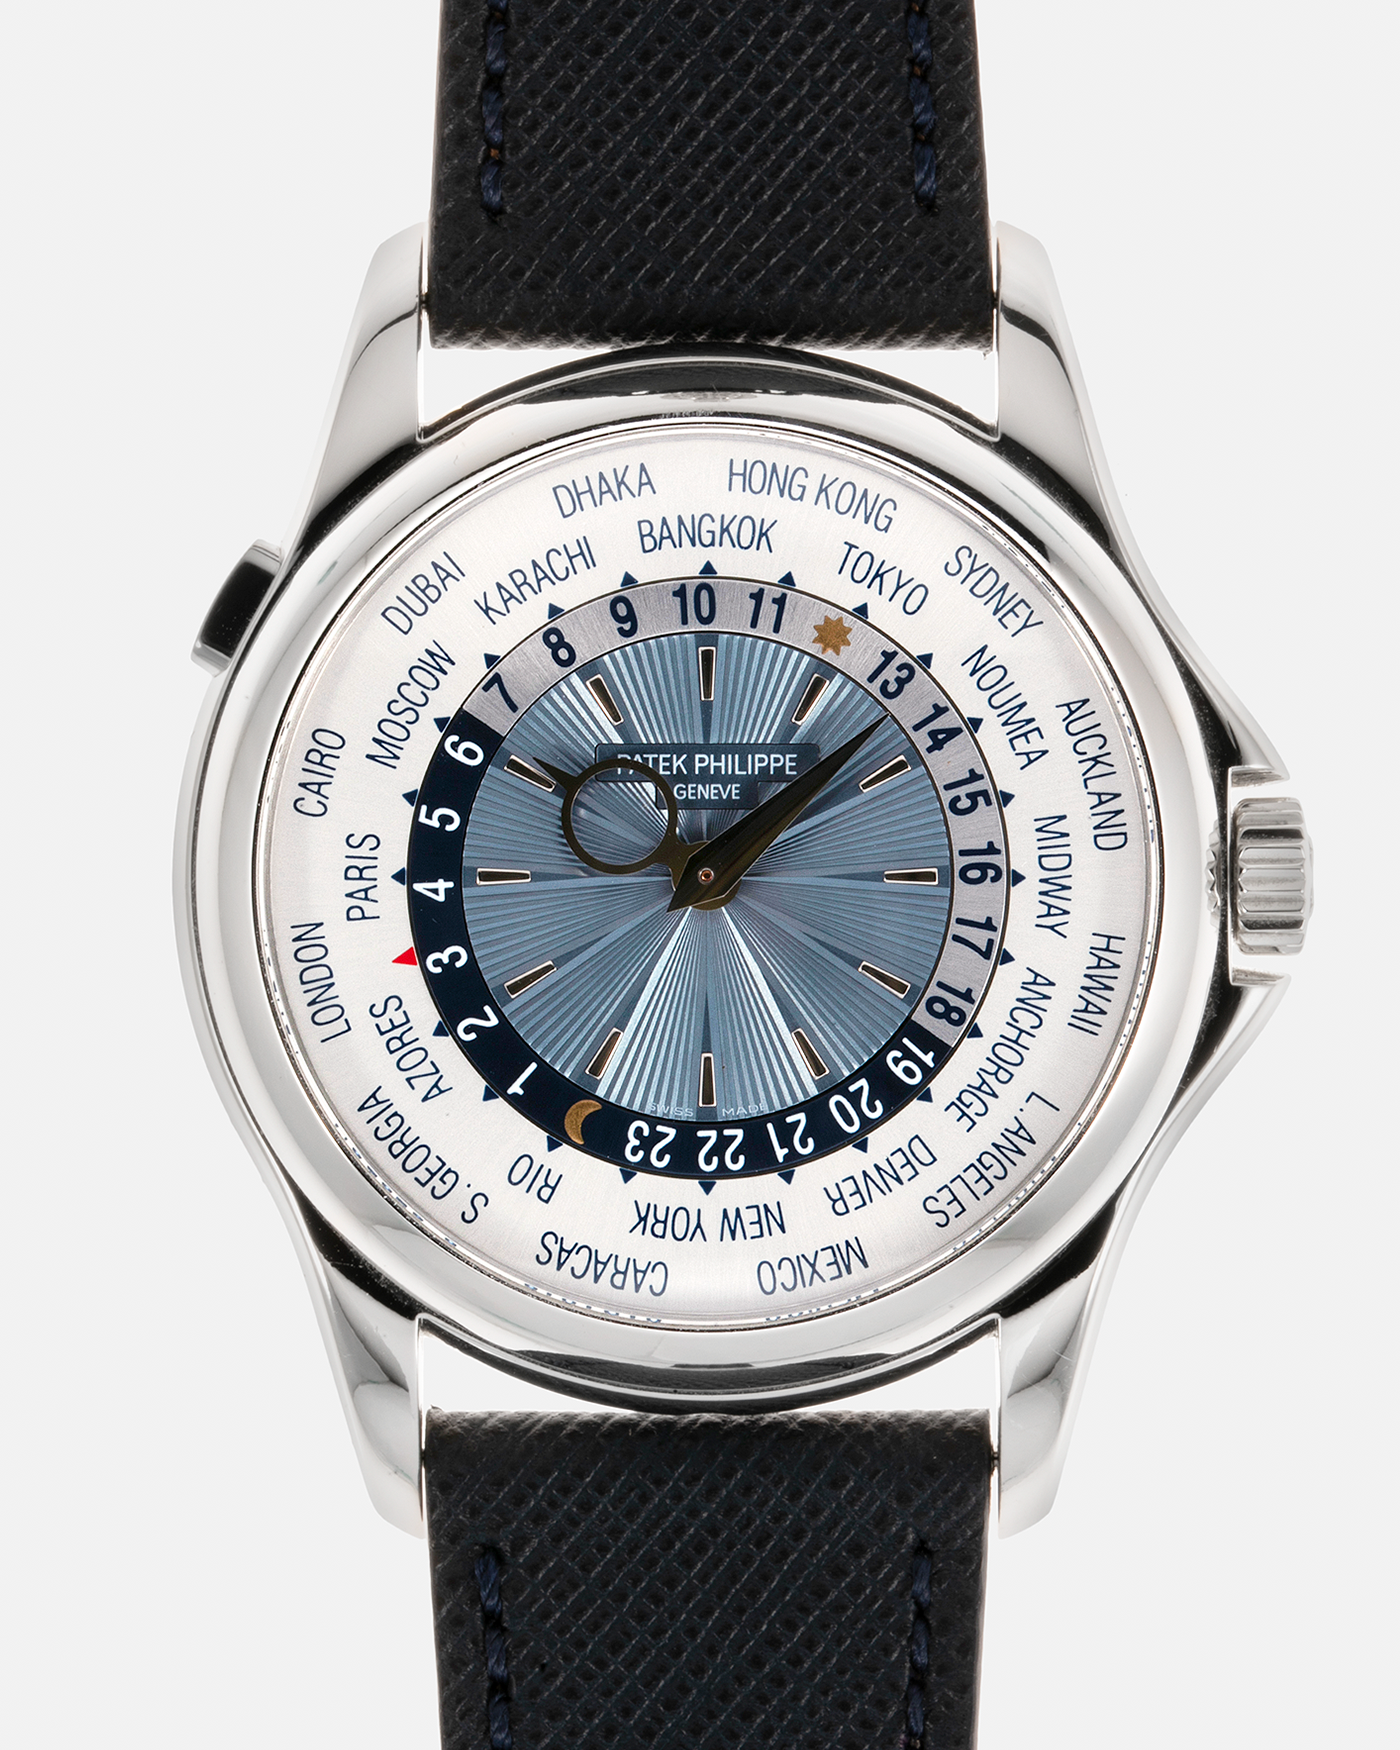 Brand: Patek Philippe Year: 2010s Model: World Time Reference Number: 5130P Material: Platinum 950 Movement: Patek Philippe Cal. 240 HU Micro-Rotor, Self-Winding Case Diameter: 39.5mm Lug Width: 21mm Bracelet: Molequin Oxford Blue Textured Calf Leather Strap with Signed Platinum 950 Deployant Clasp